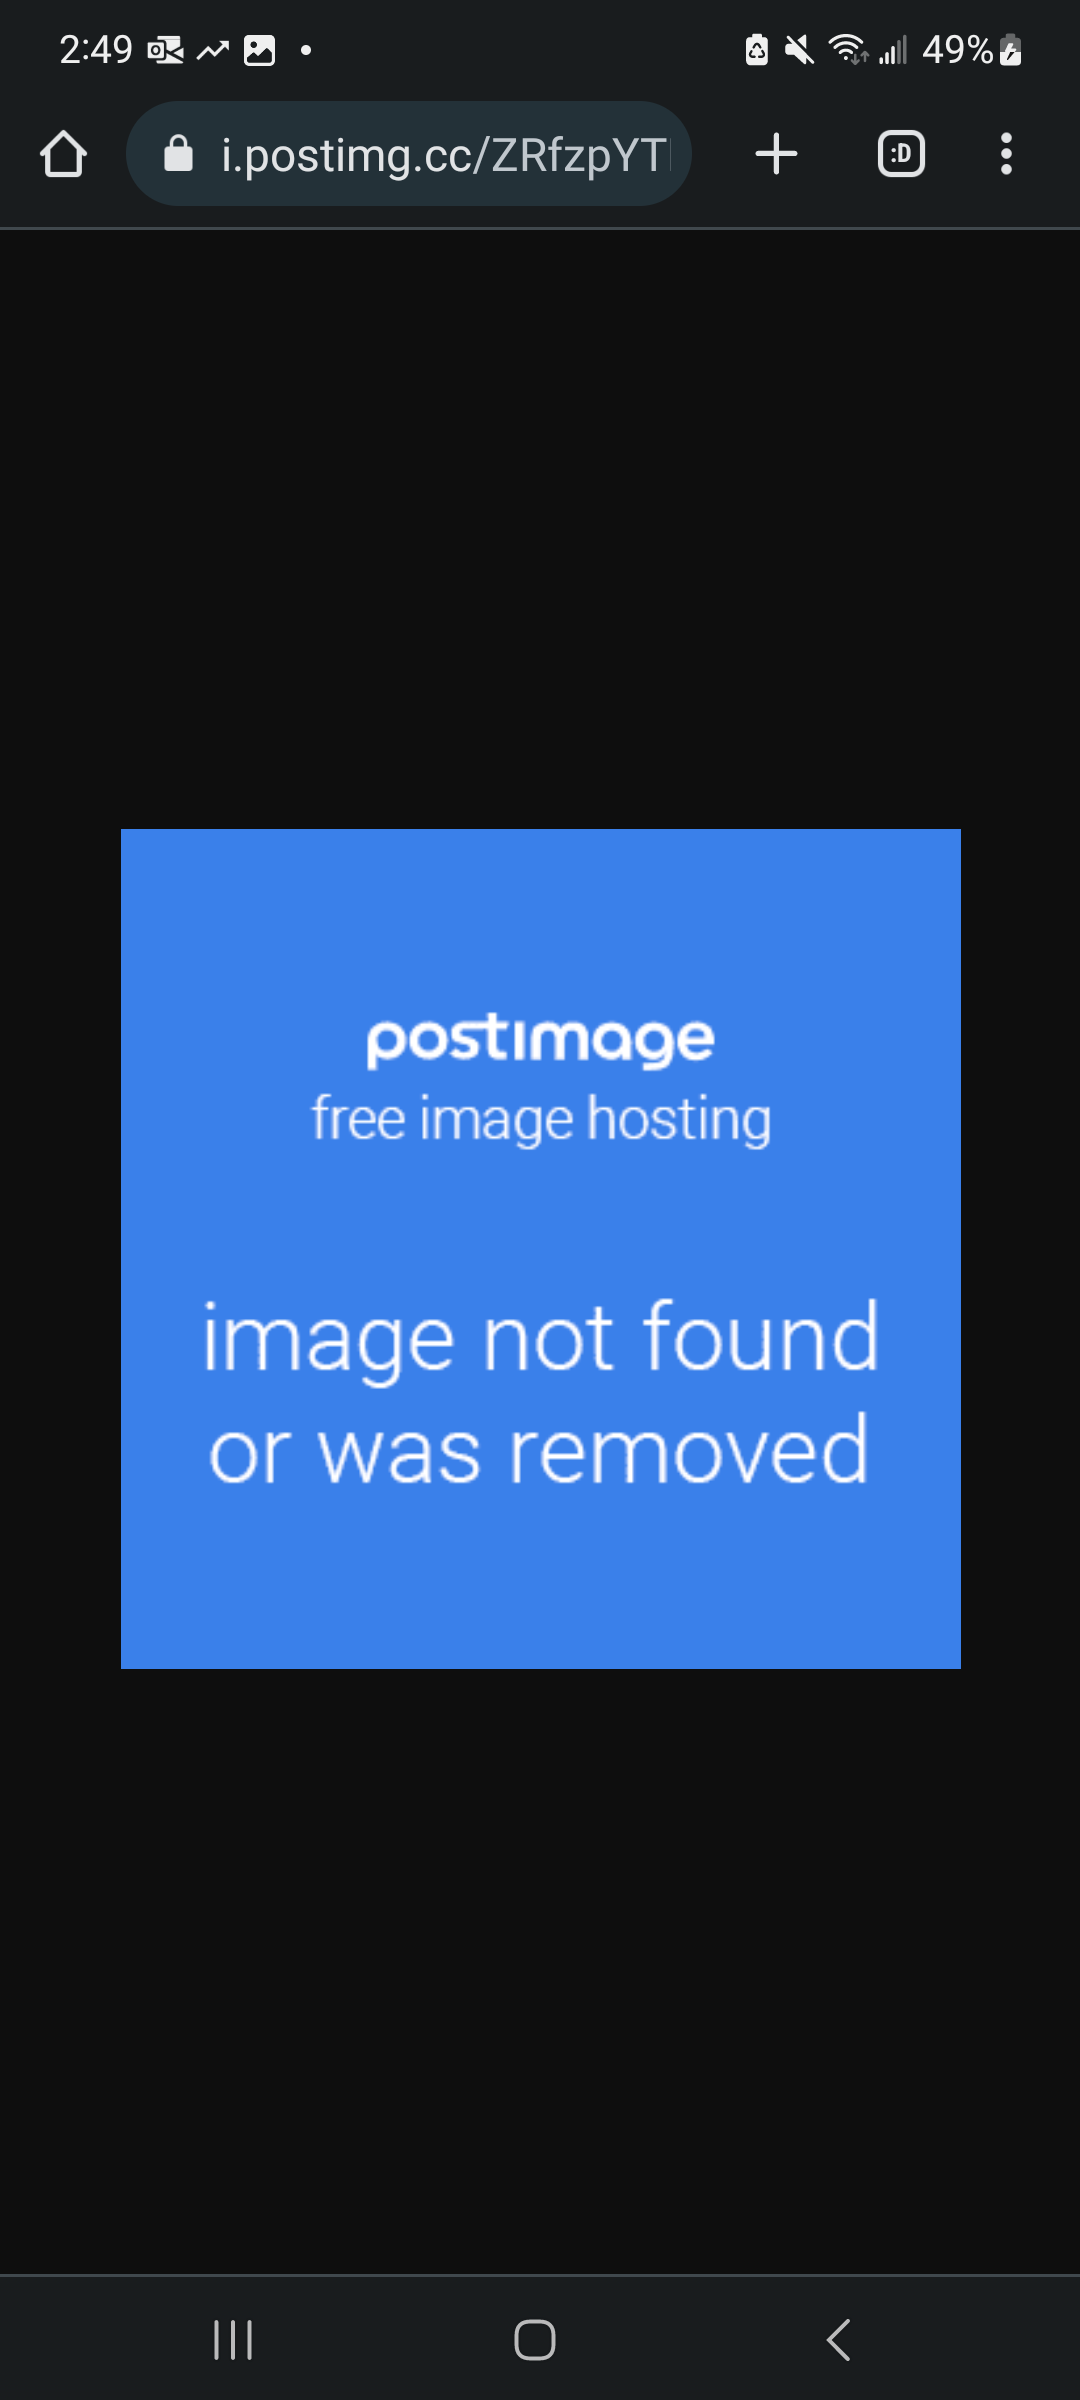 screenshot of error message saying "image not found or was removed"